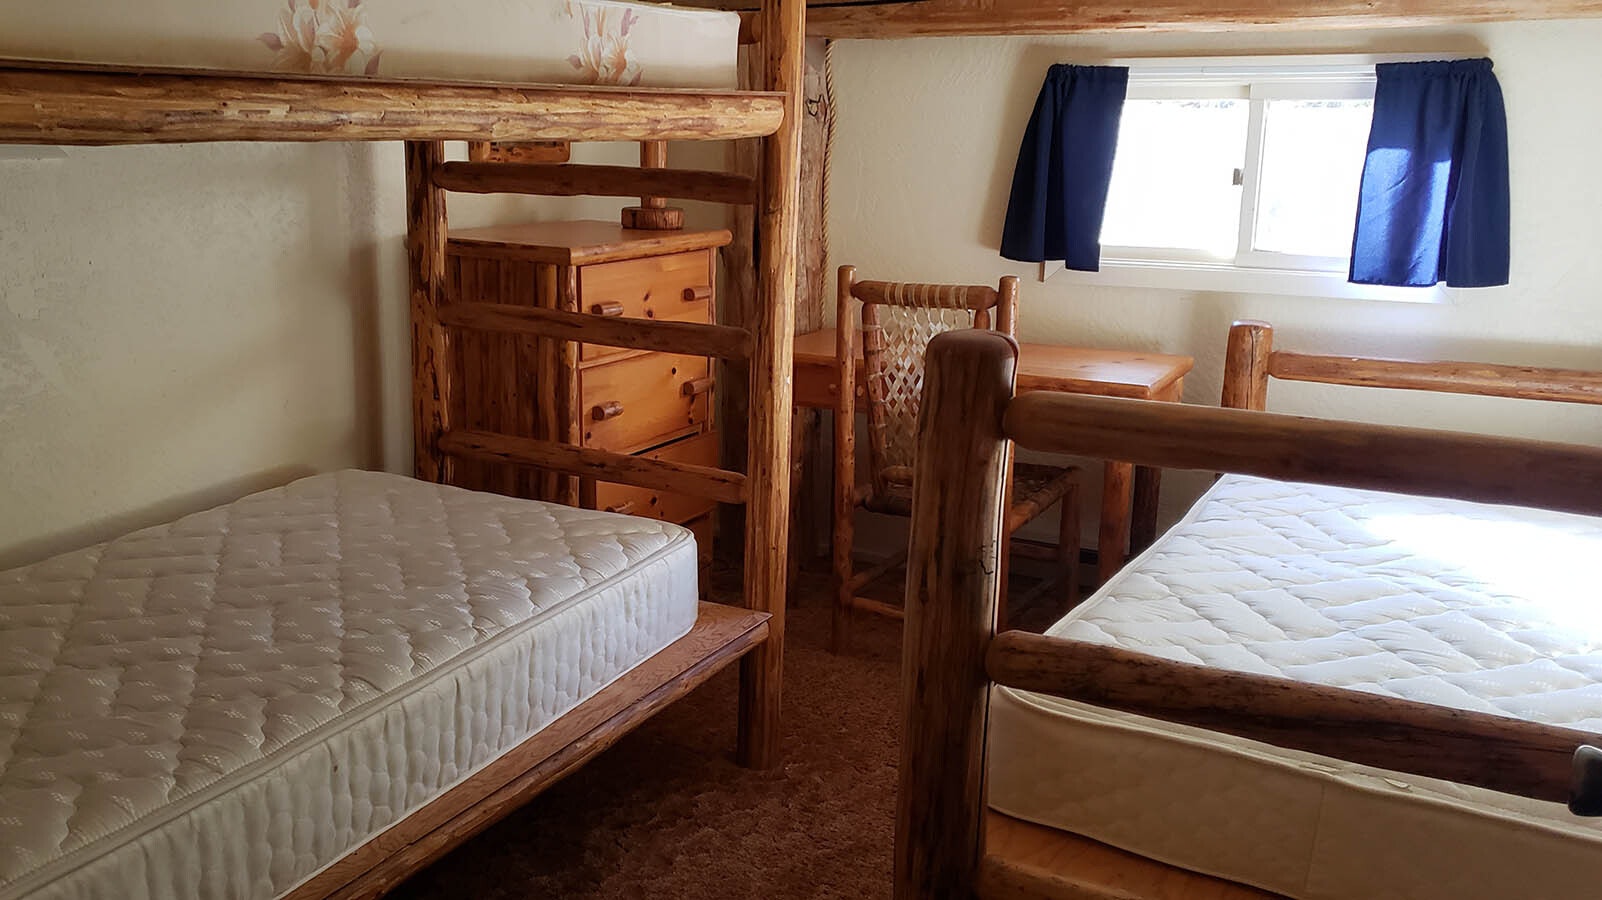 Bunk beds have been stuffed into the 16 guest rooms at the Granite Creek Ranch Lodge.